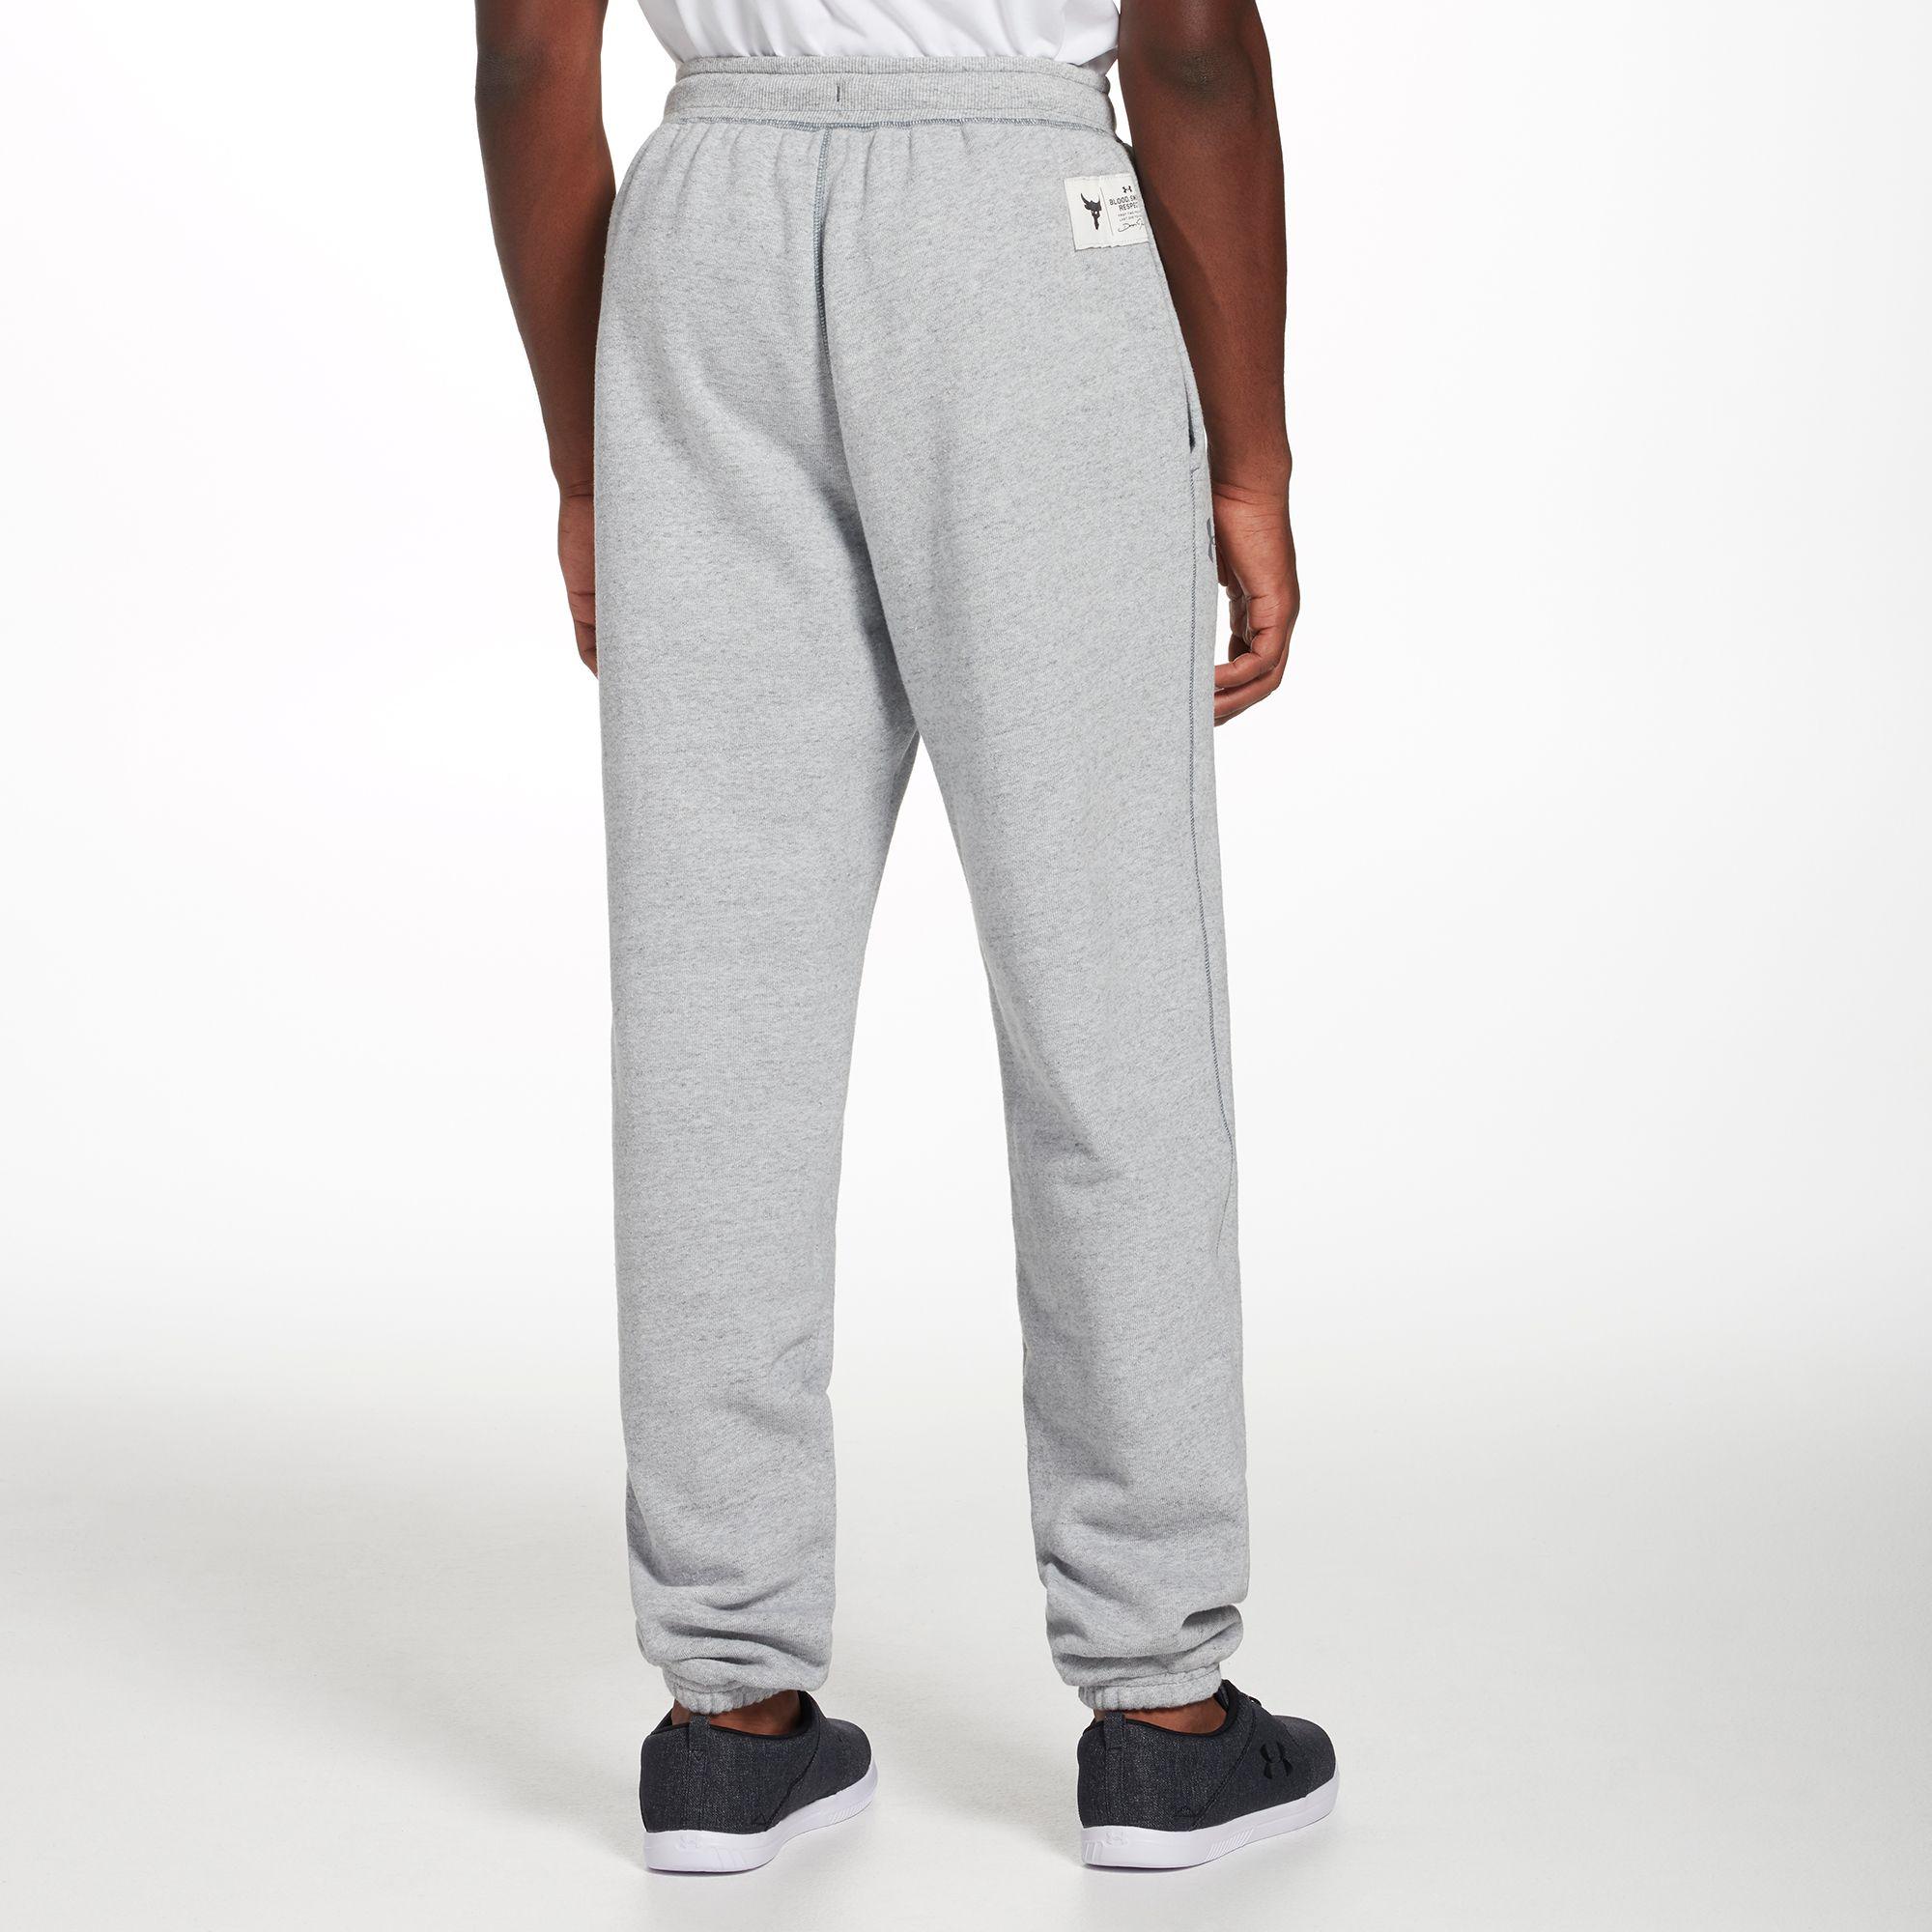 Under Armour Fleece Project Rock Warm Up Pants in Gray for Men - Lyst